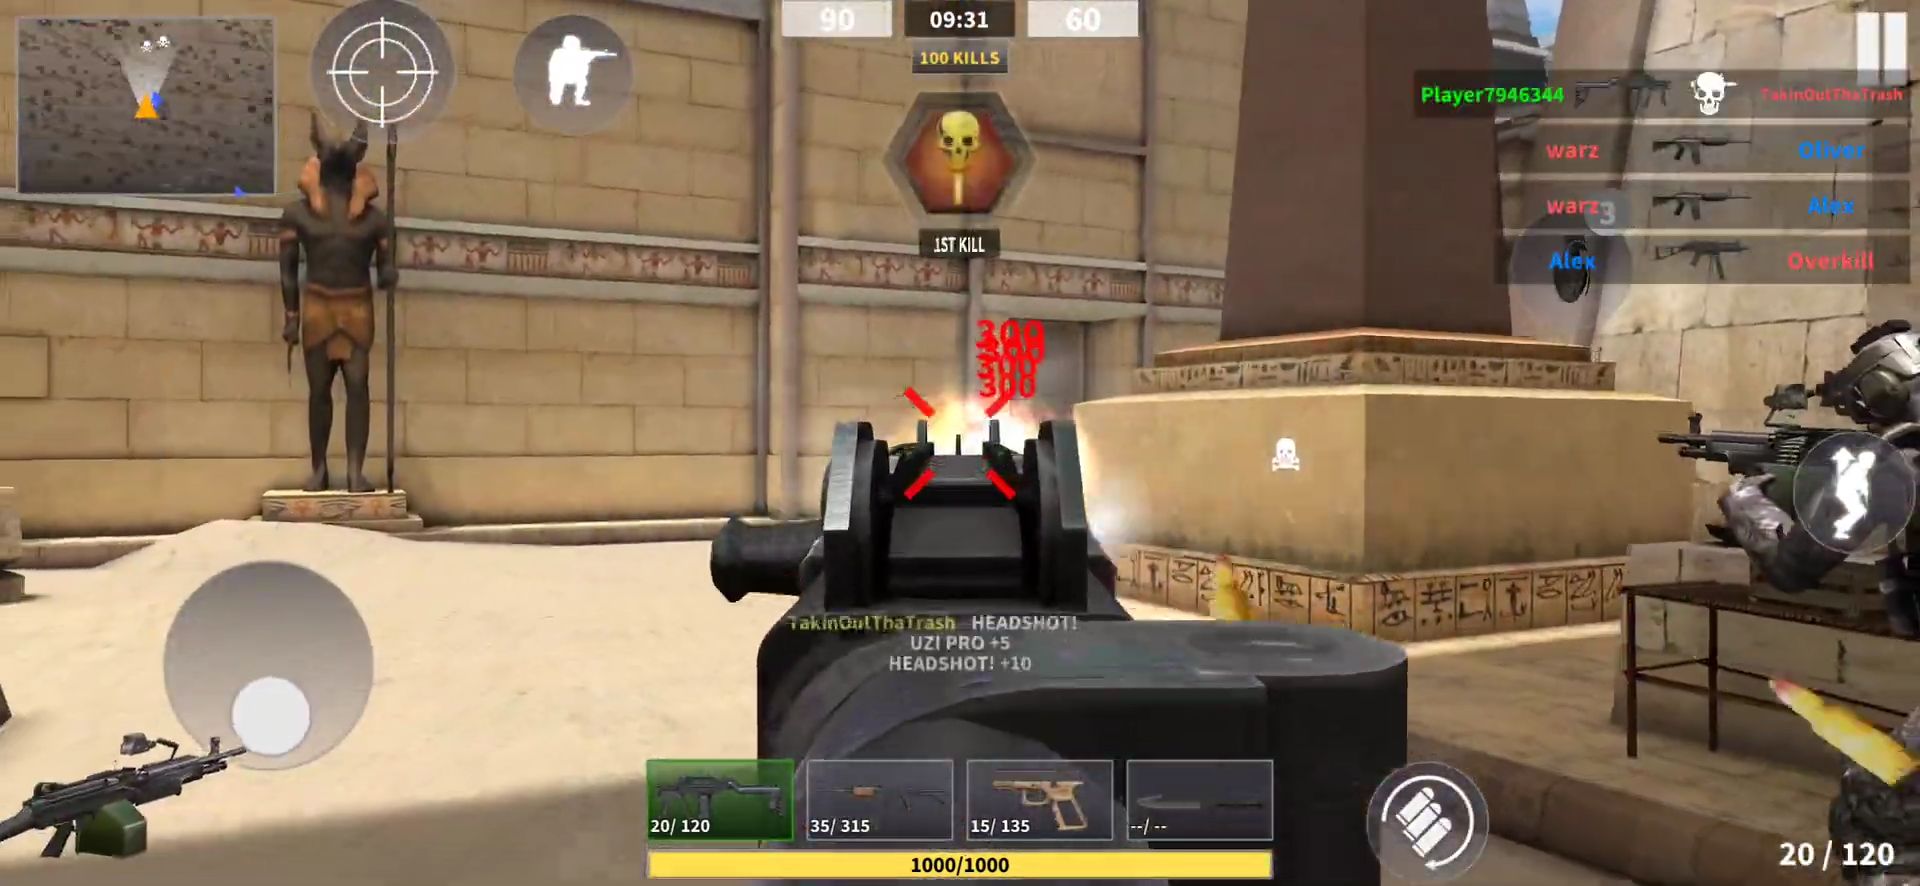 Hazmob FPS Online multiplayer fps shooting game Download APK for Android (Free) mob